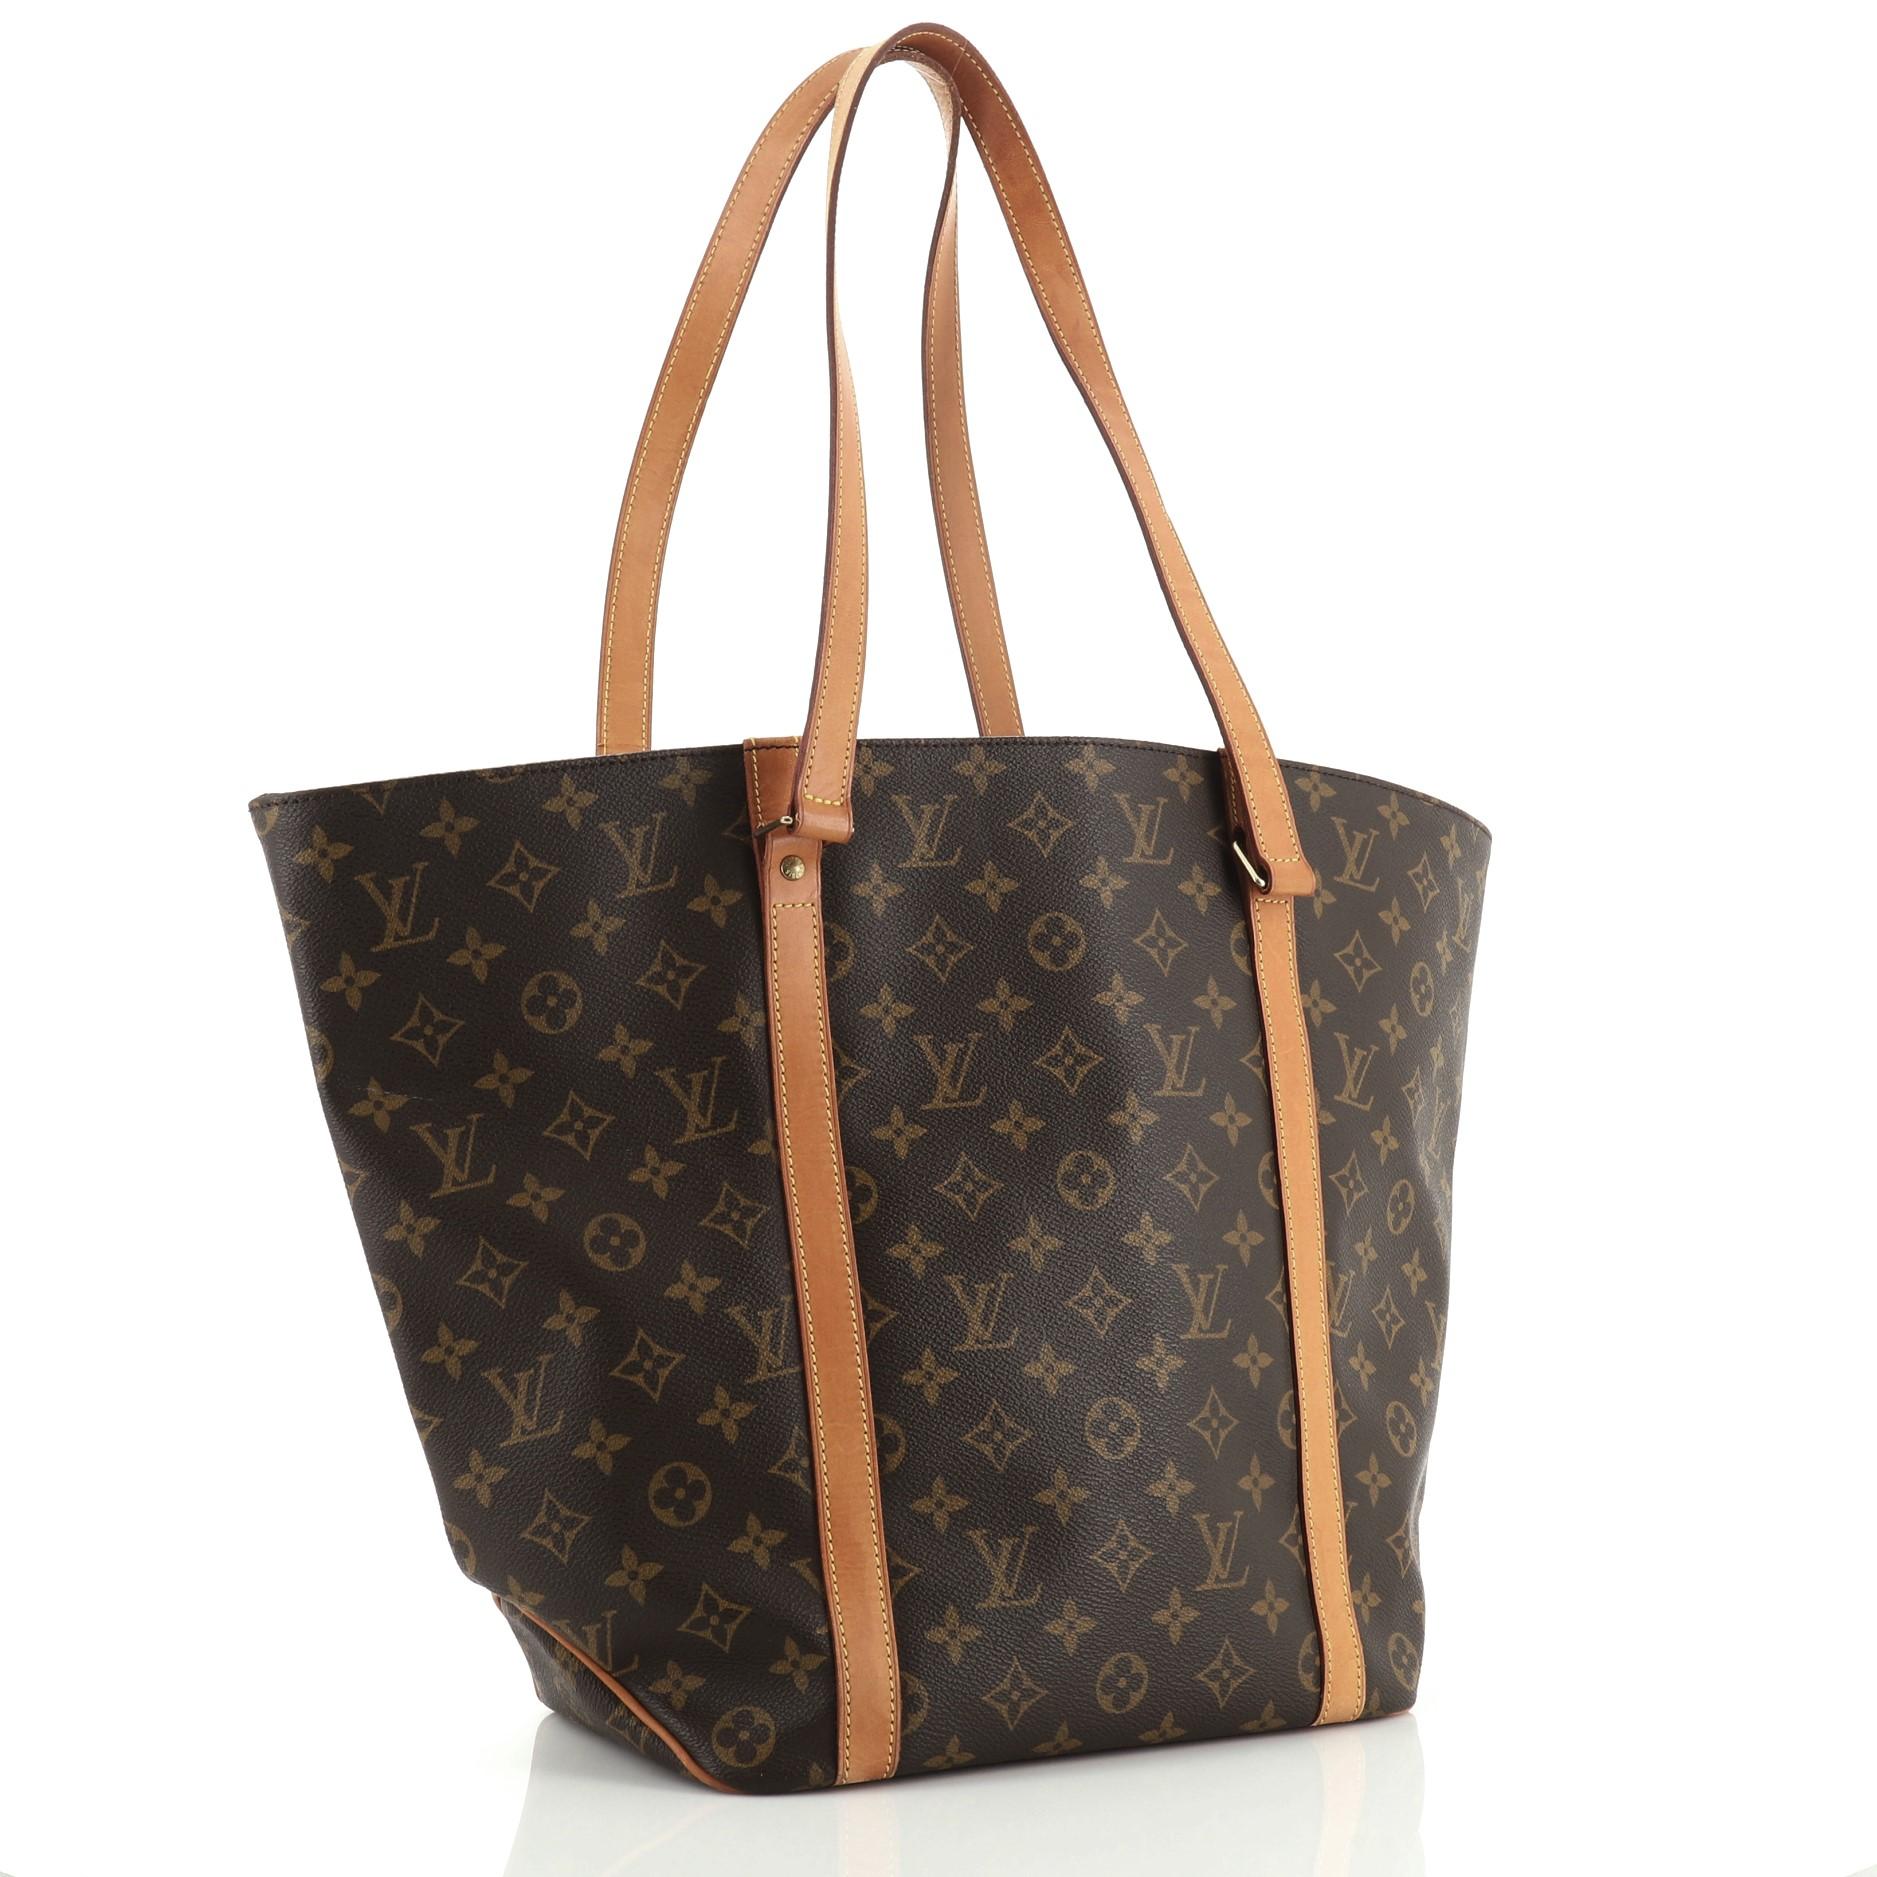 This Louis Vuitton Shopping Sac Handbag Monogram Canvas MM, crafted with brown monogram coated canvas, features dual tall vachetta leather straps and gold-tone hardware. It opens to a brown fabric interior with zip pocket. Authenticity code reads: